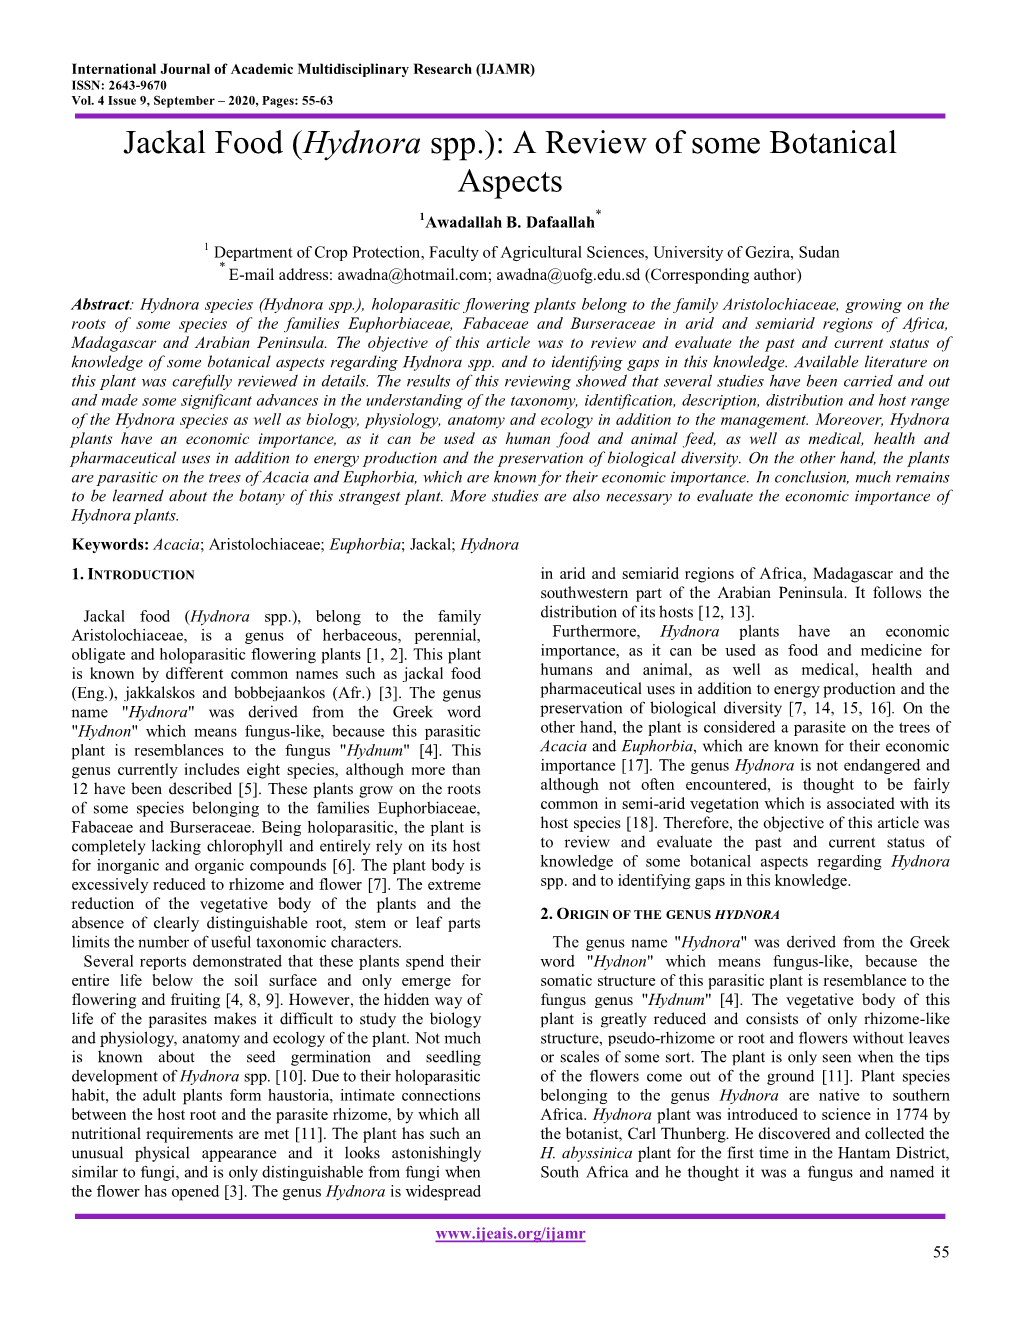 Hydnora Spp.): a Review of Some Botanical Aspects 1Awadallah B